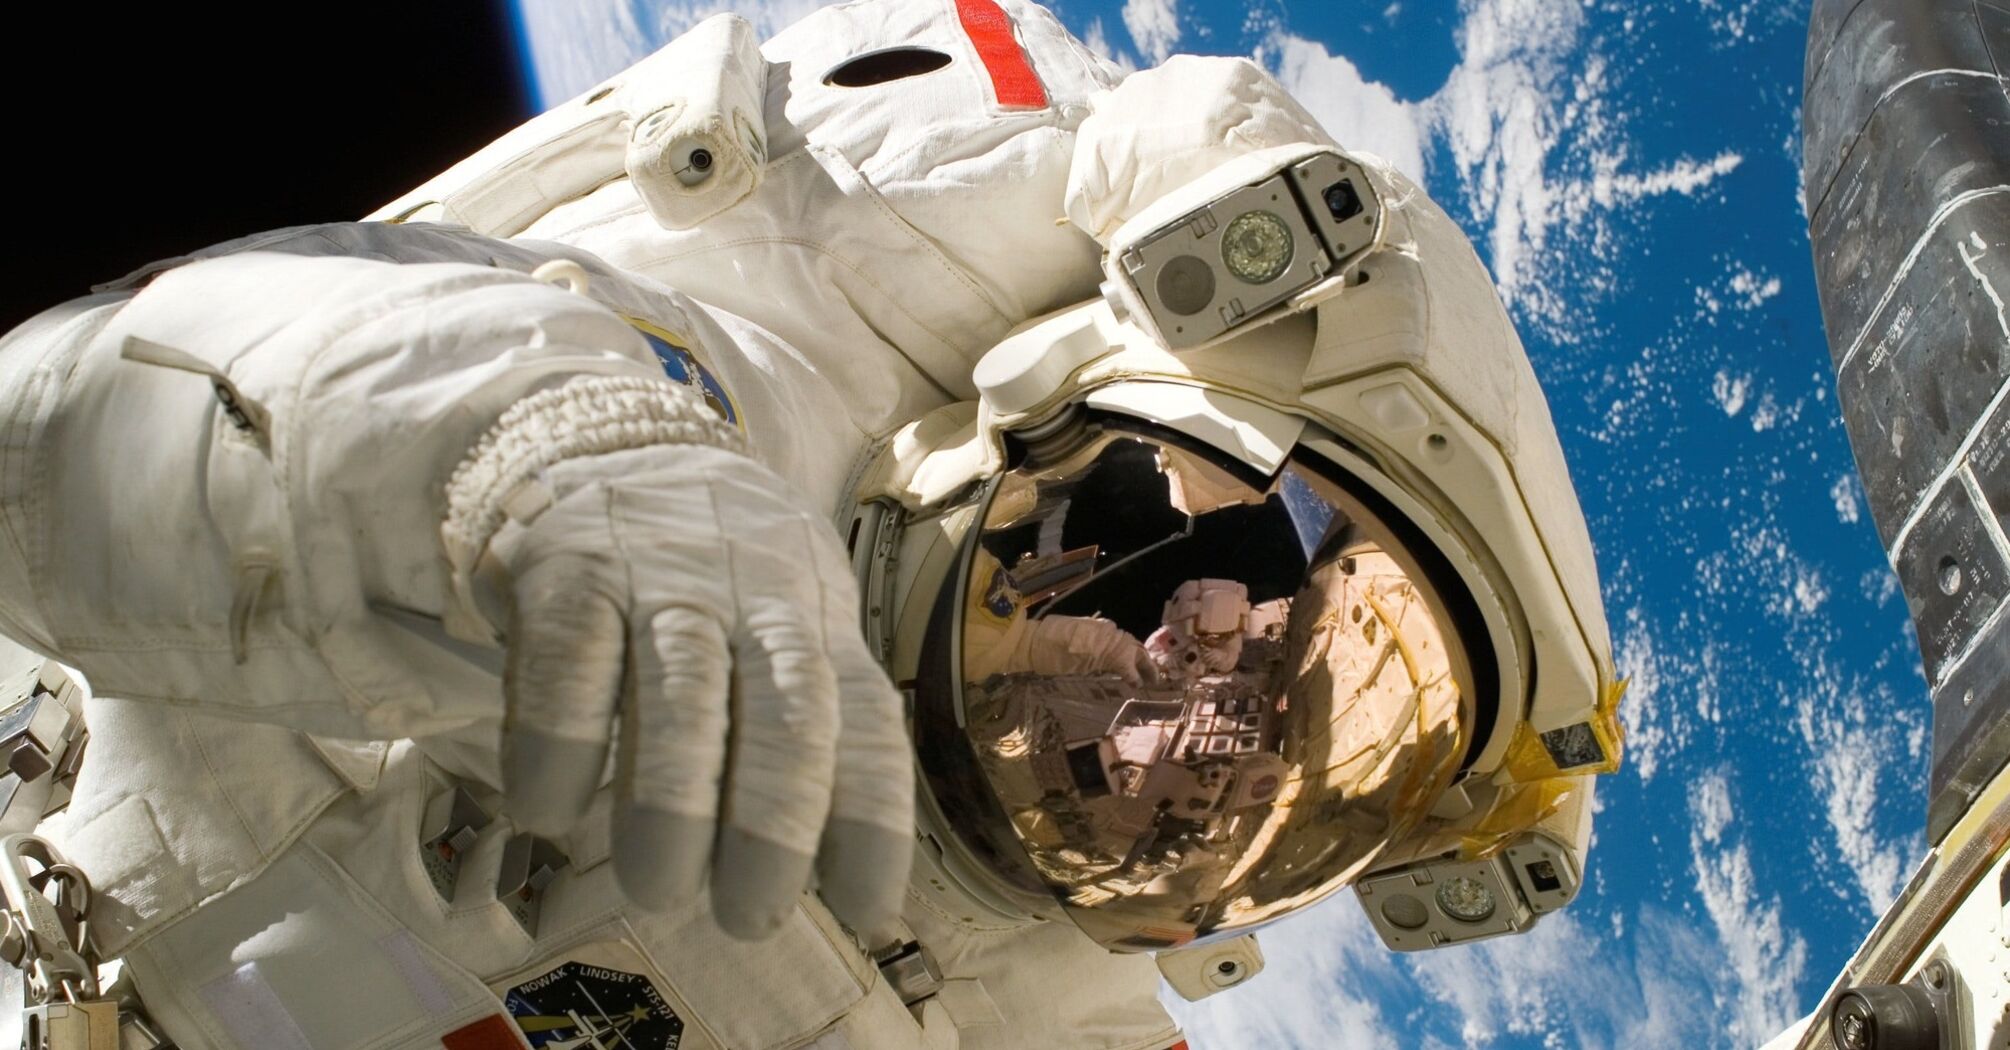 Astronaut in a white space suit with a reflective visor helmet against the backdrop of Earth and part of a spacecraft